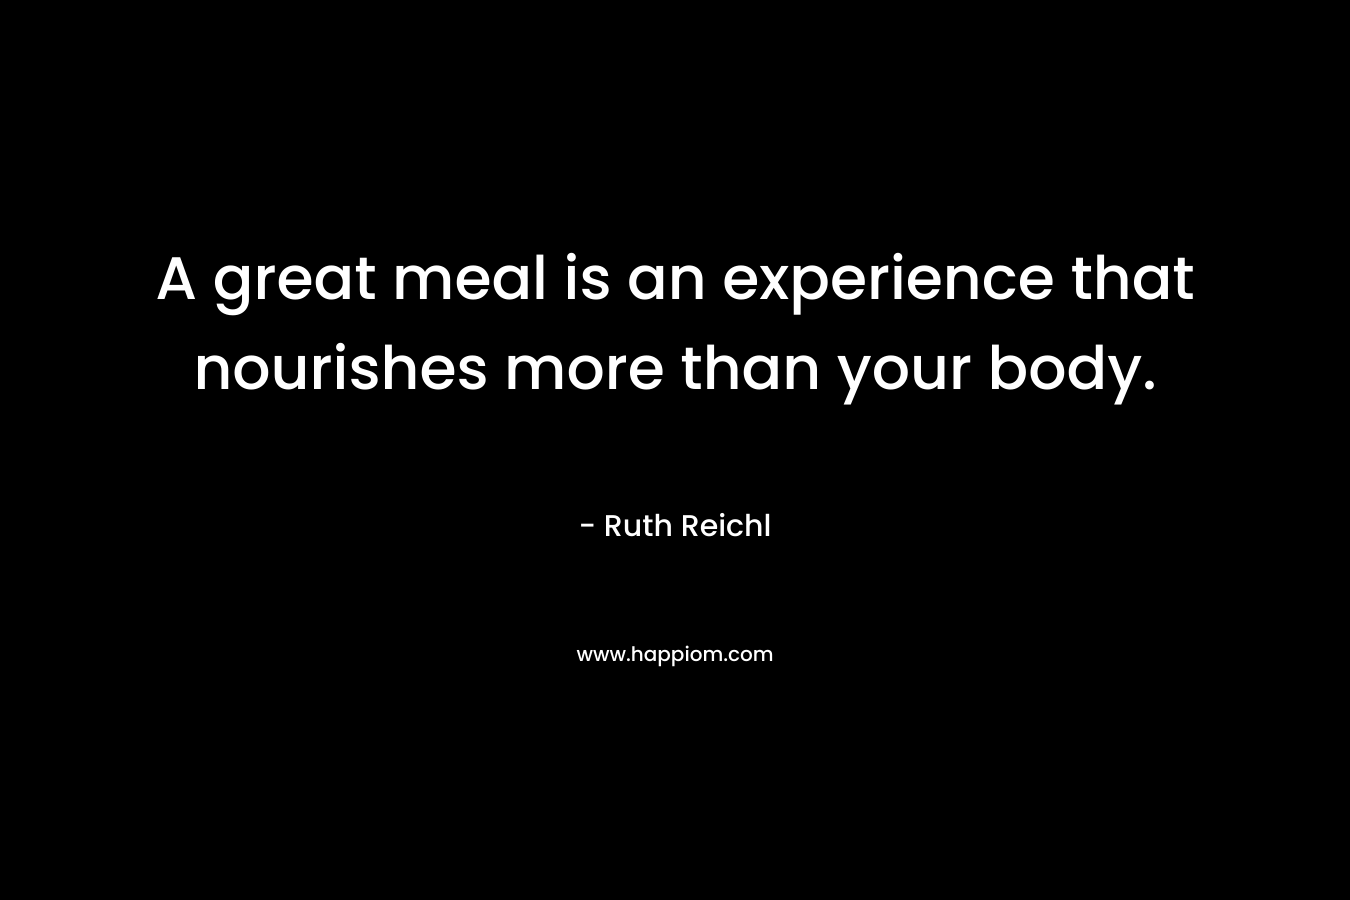 A great meal is an experience that nourishes more than your body. – Ruth Reichl